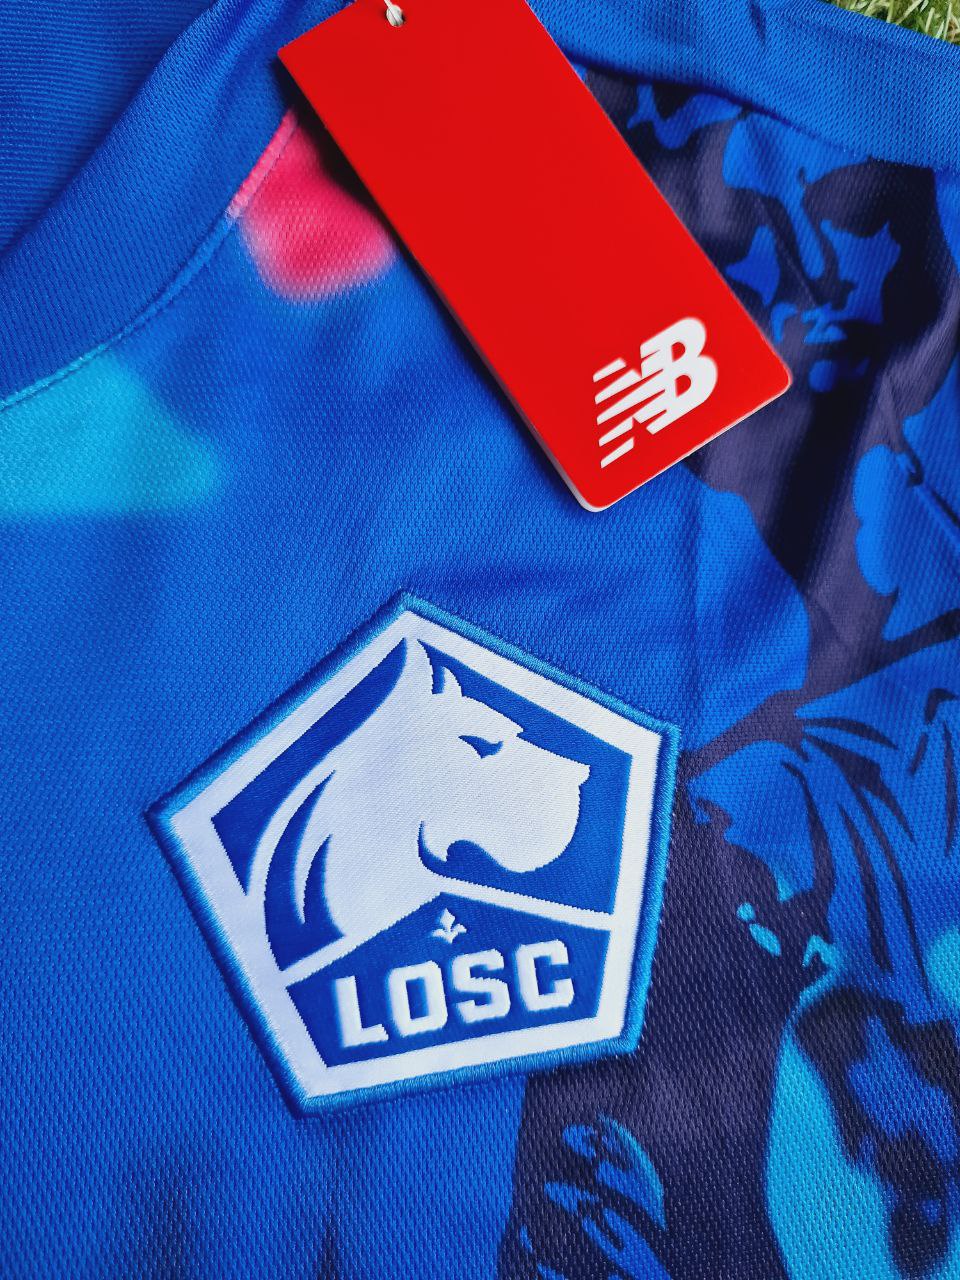 Losc Lille Fourth Kit Special Edition Lens